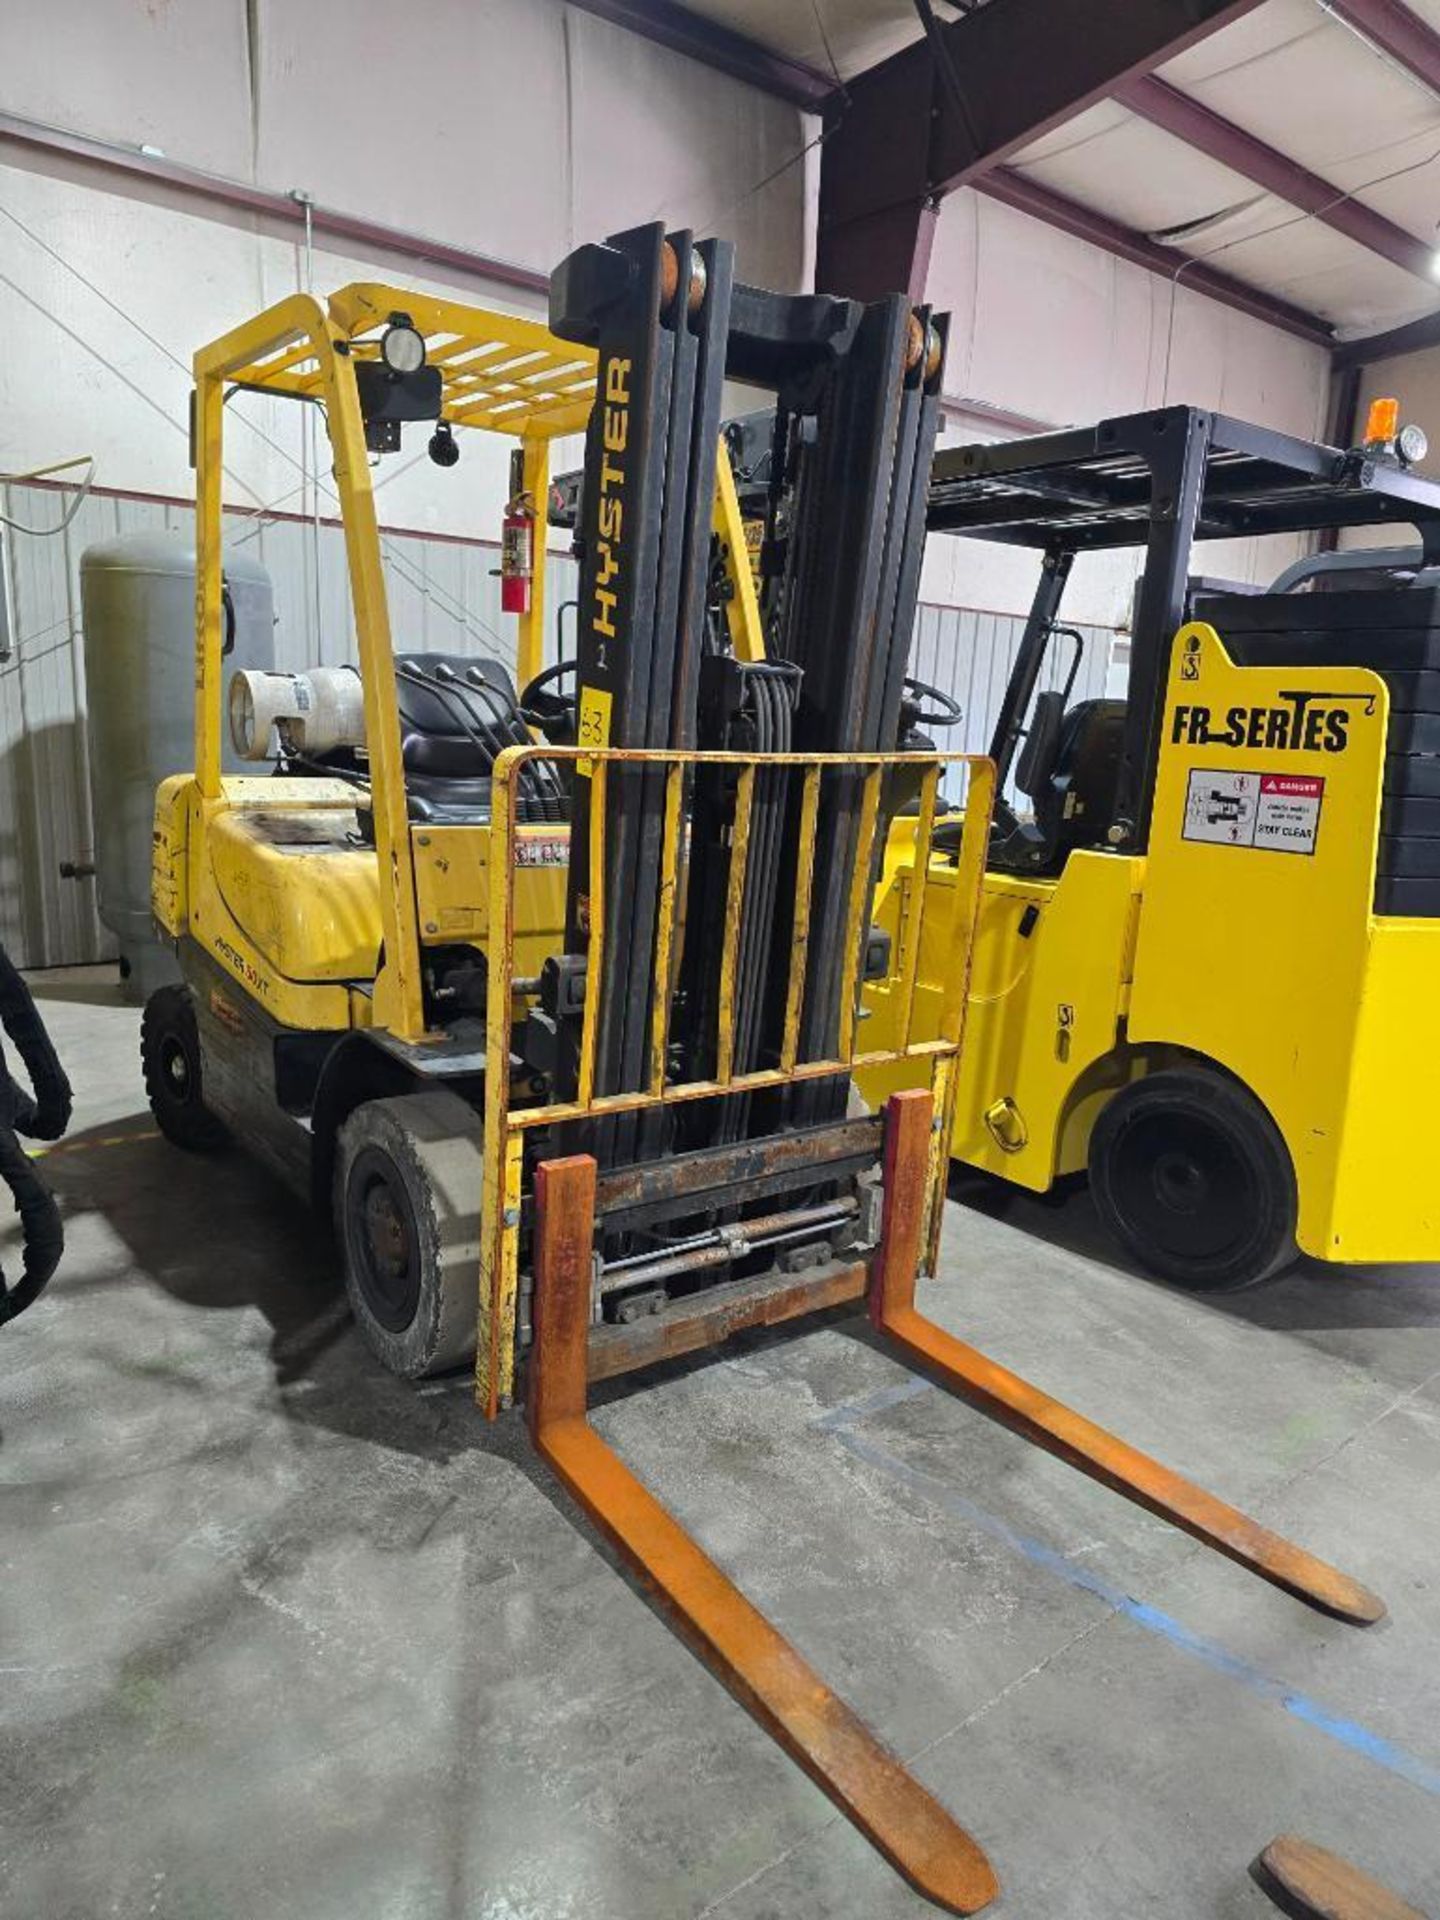 2018 Hyster H50XT 5,000 LB. Forklift, S/N A380V06798S, 195" Lift Height, Solid Cushion Tires, Sidesh - Image 5 of 13